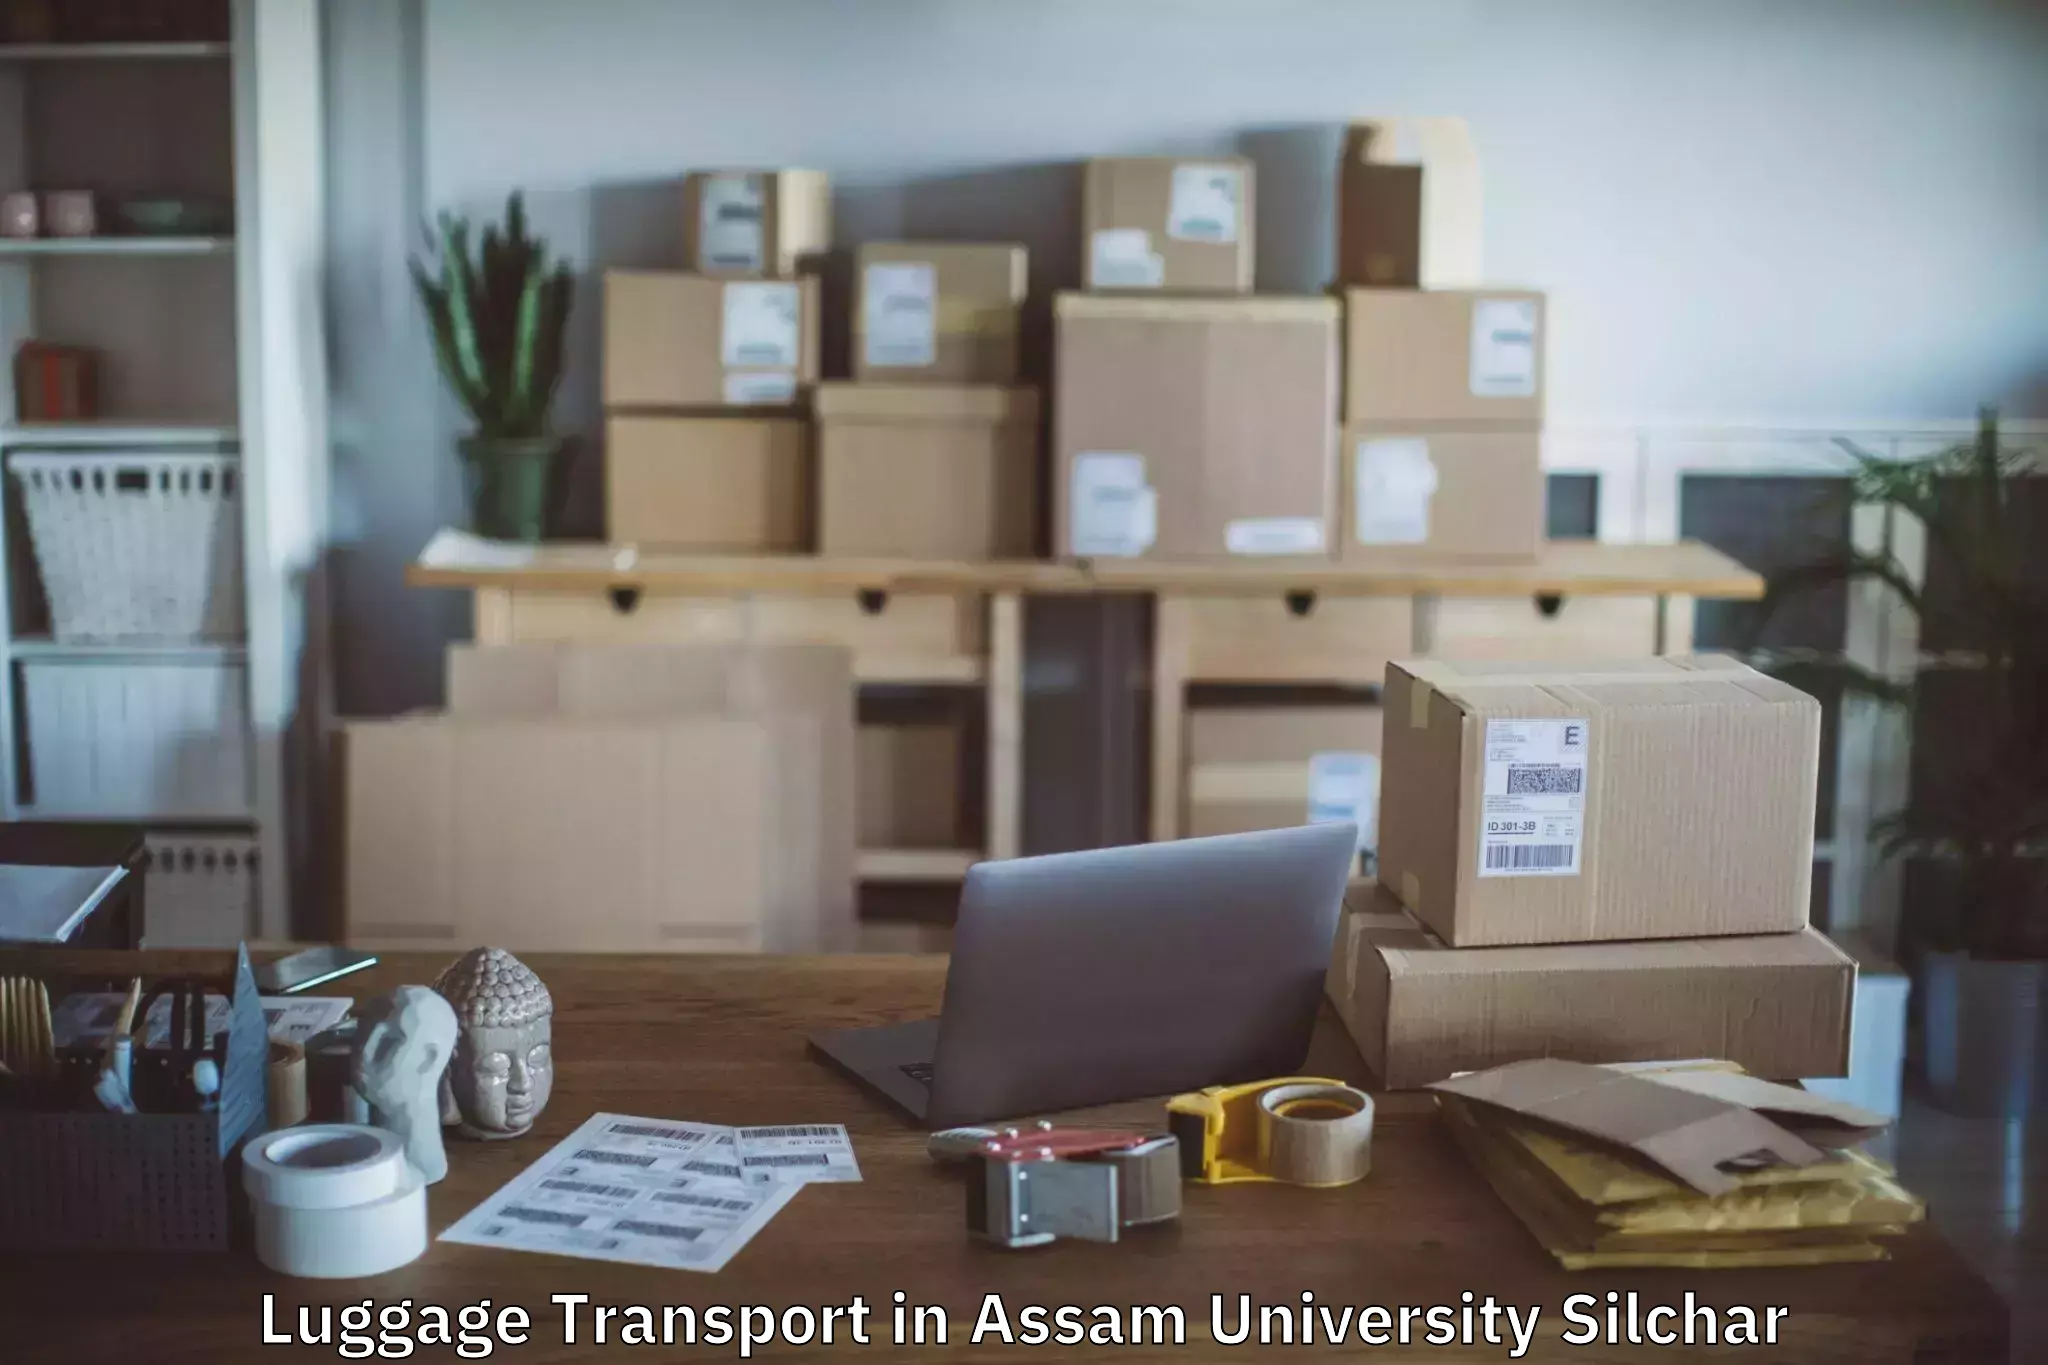 Luggage transport operations in Assam University Silchar